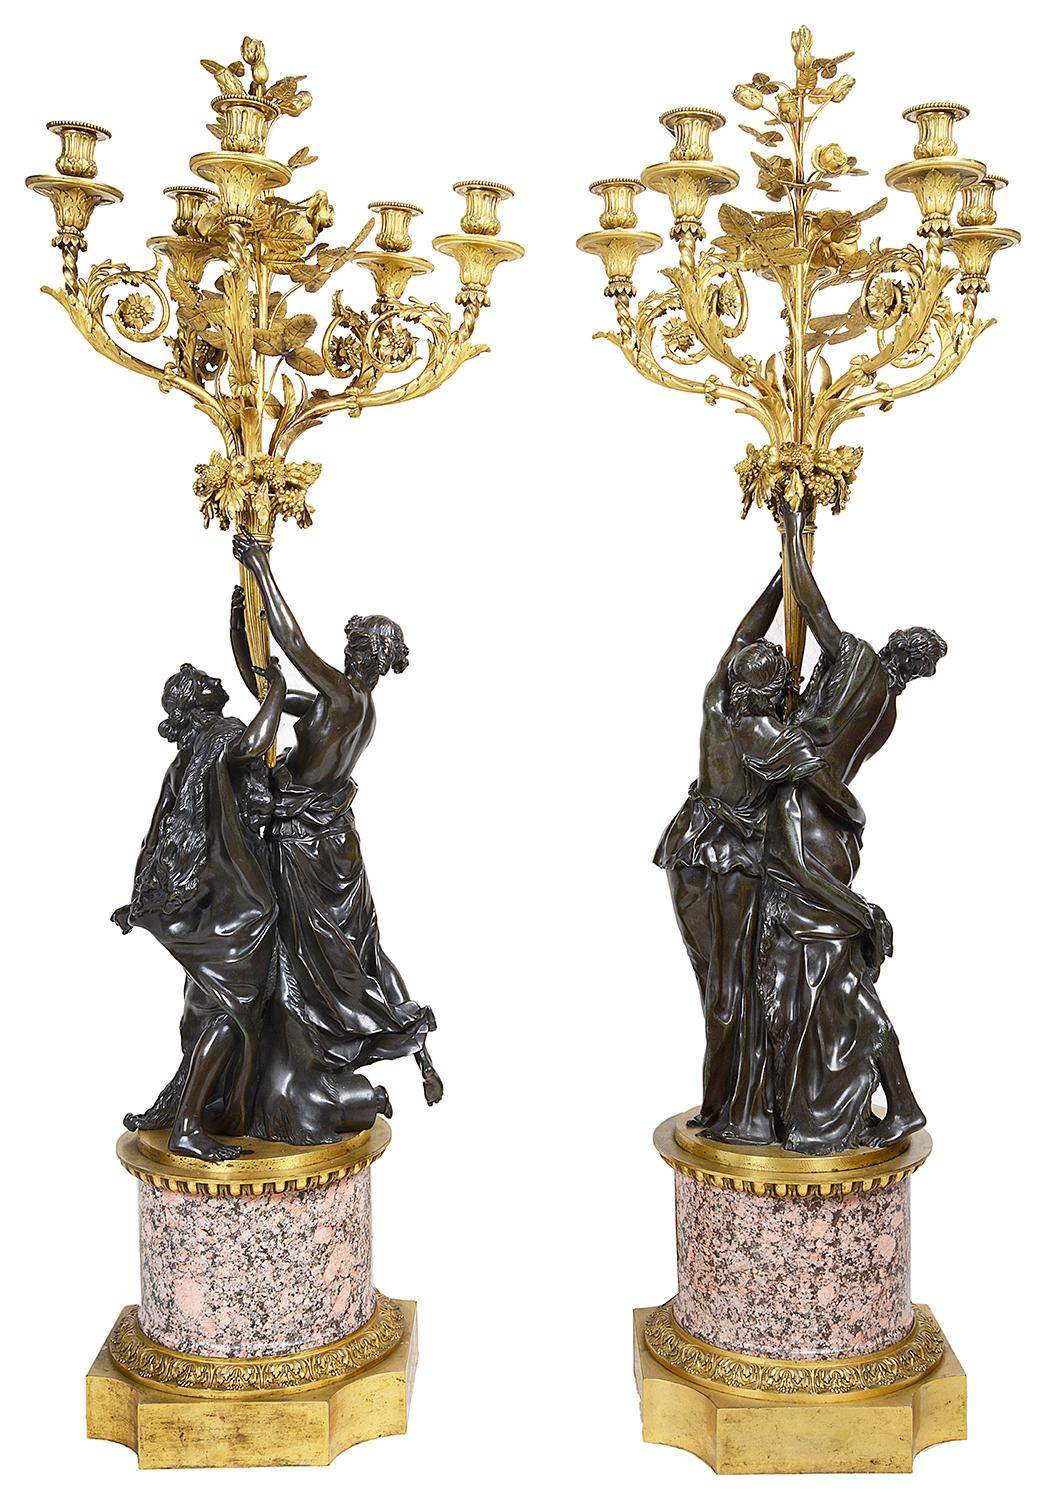 A very impressive good quality pair of 19th century classical bronze and ormolu candelabra, each with ormolu roses, leaves and four scrolling foliate branches, supported by a pair of classical semi nude maidens, raised on gilded ormolu-mounted